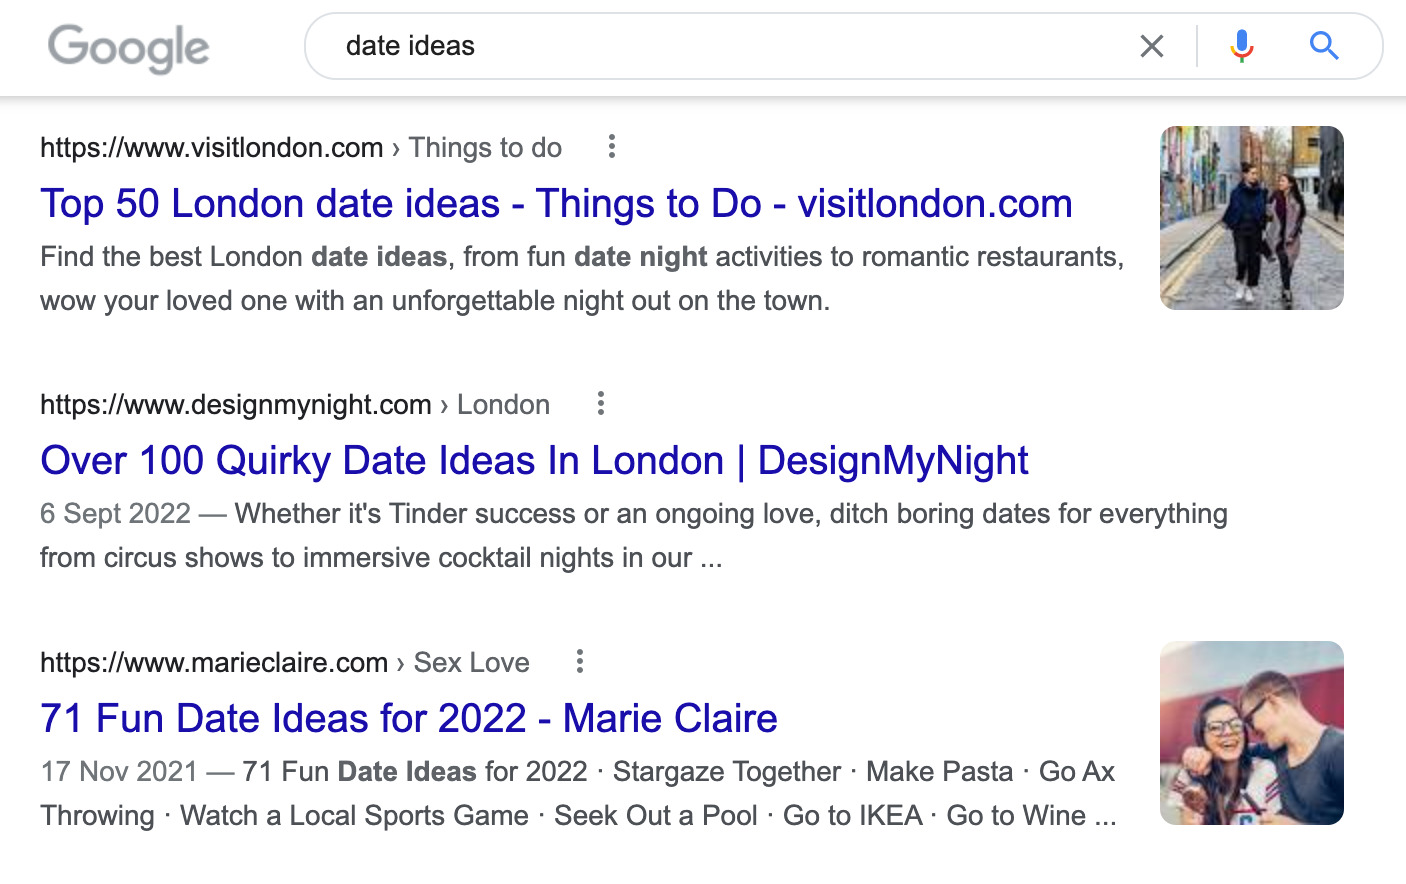 SERP for the query "dating ideas"